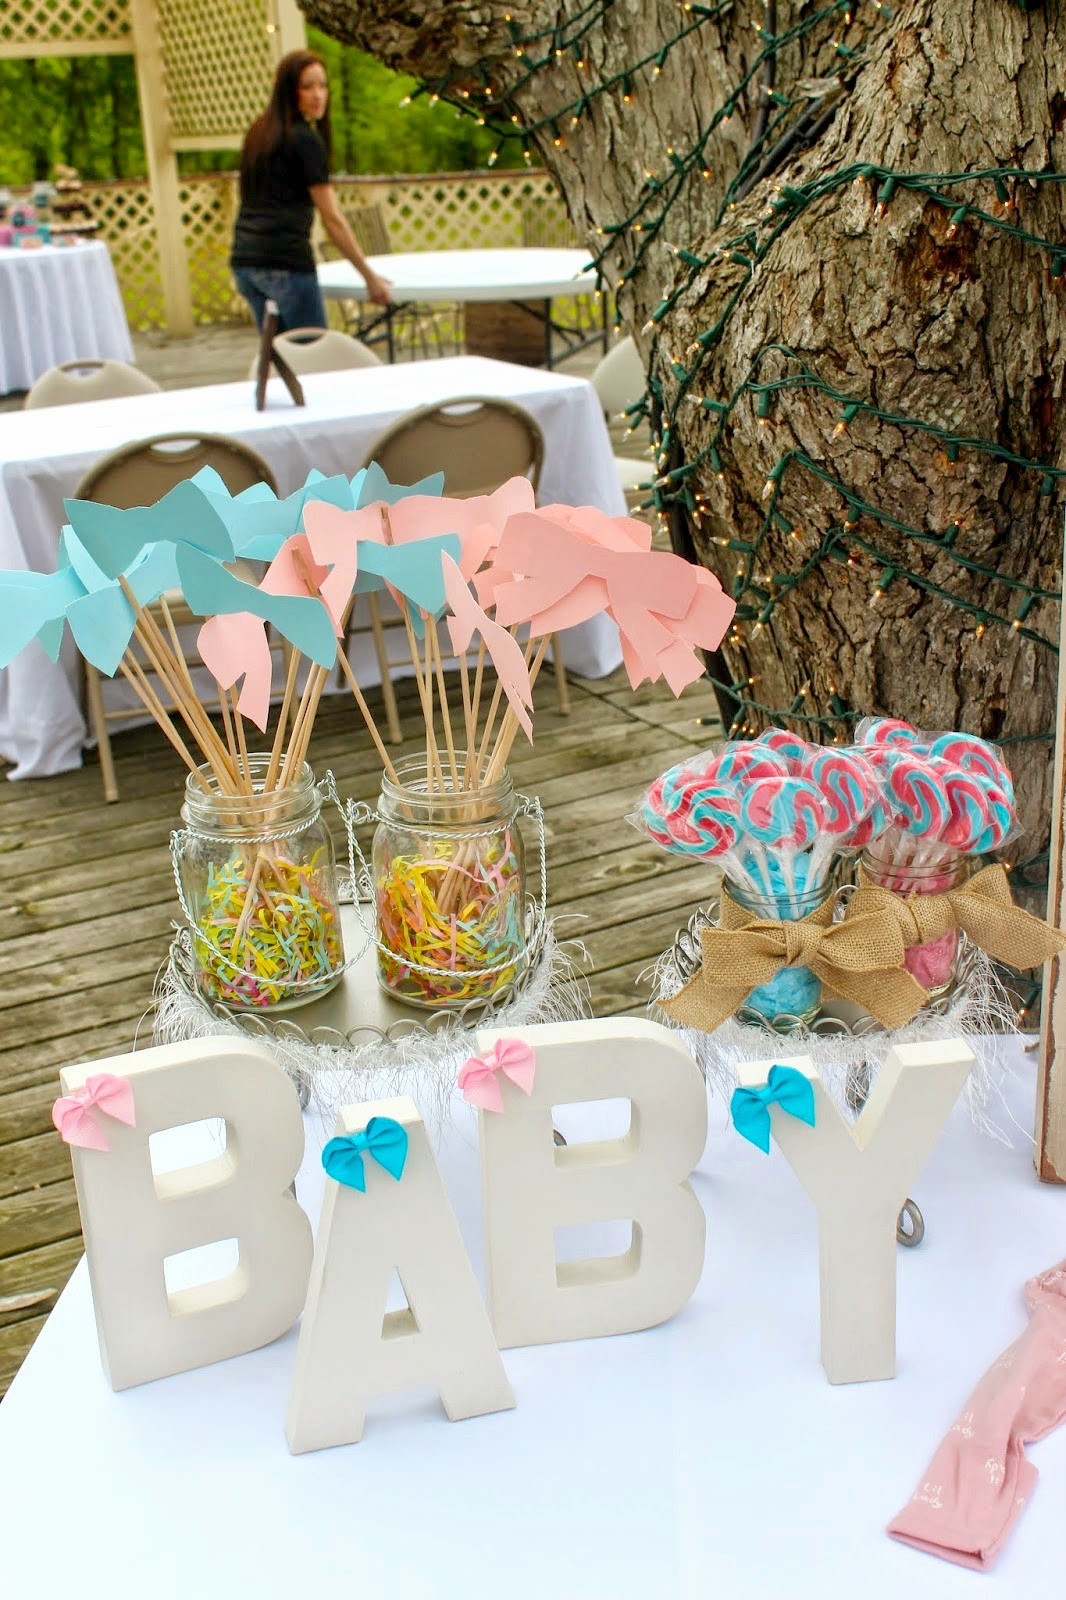 Cute Ideas For A Gender Reveal Party
 KEEP CALM AND CARRY ON Gender Reveal Party Pink or Blue 